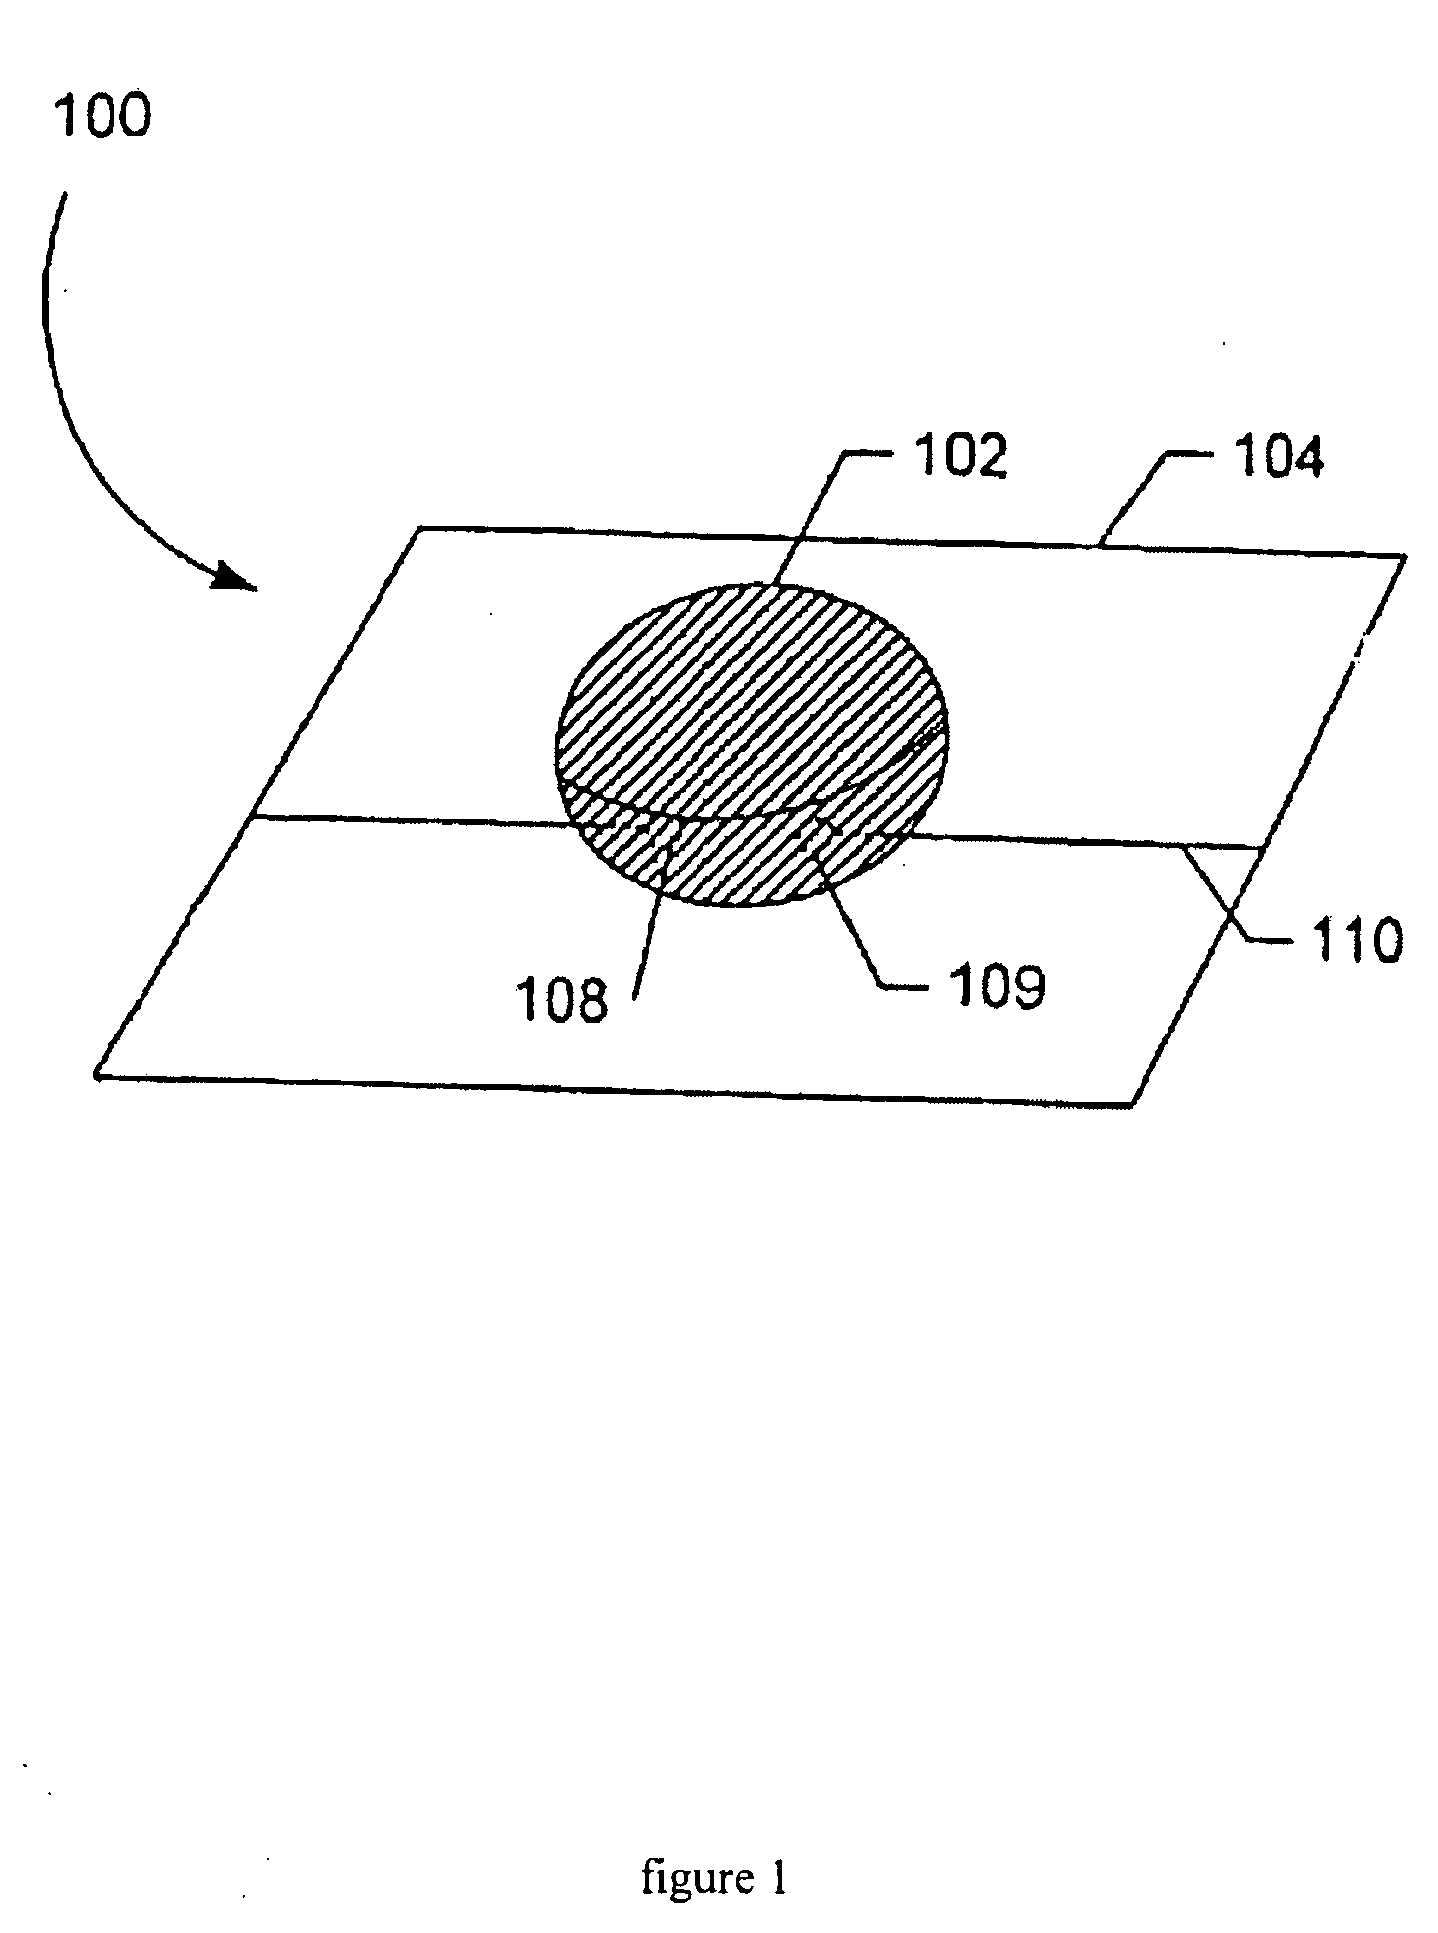 Systems and methods for calibrating osmolarity measuring devices